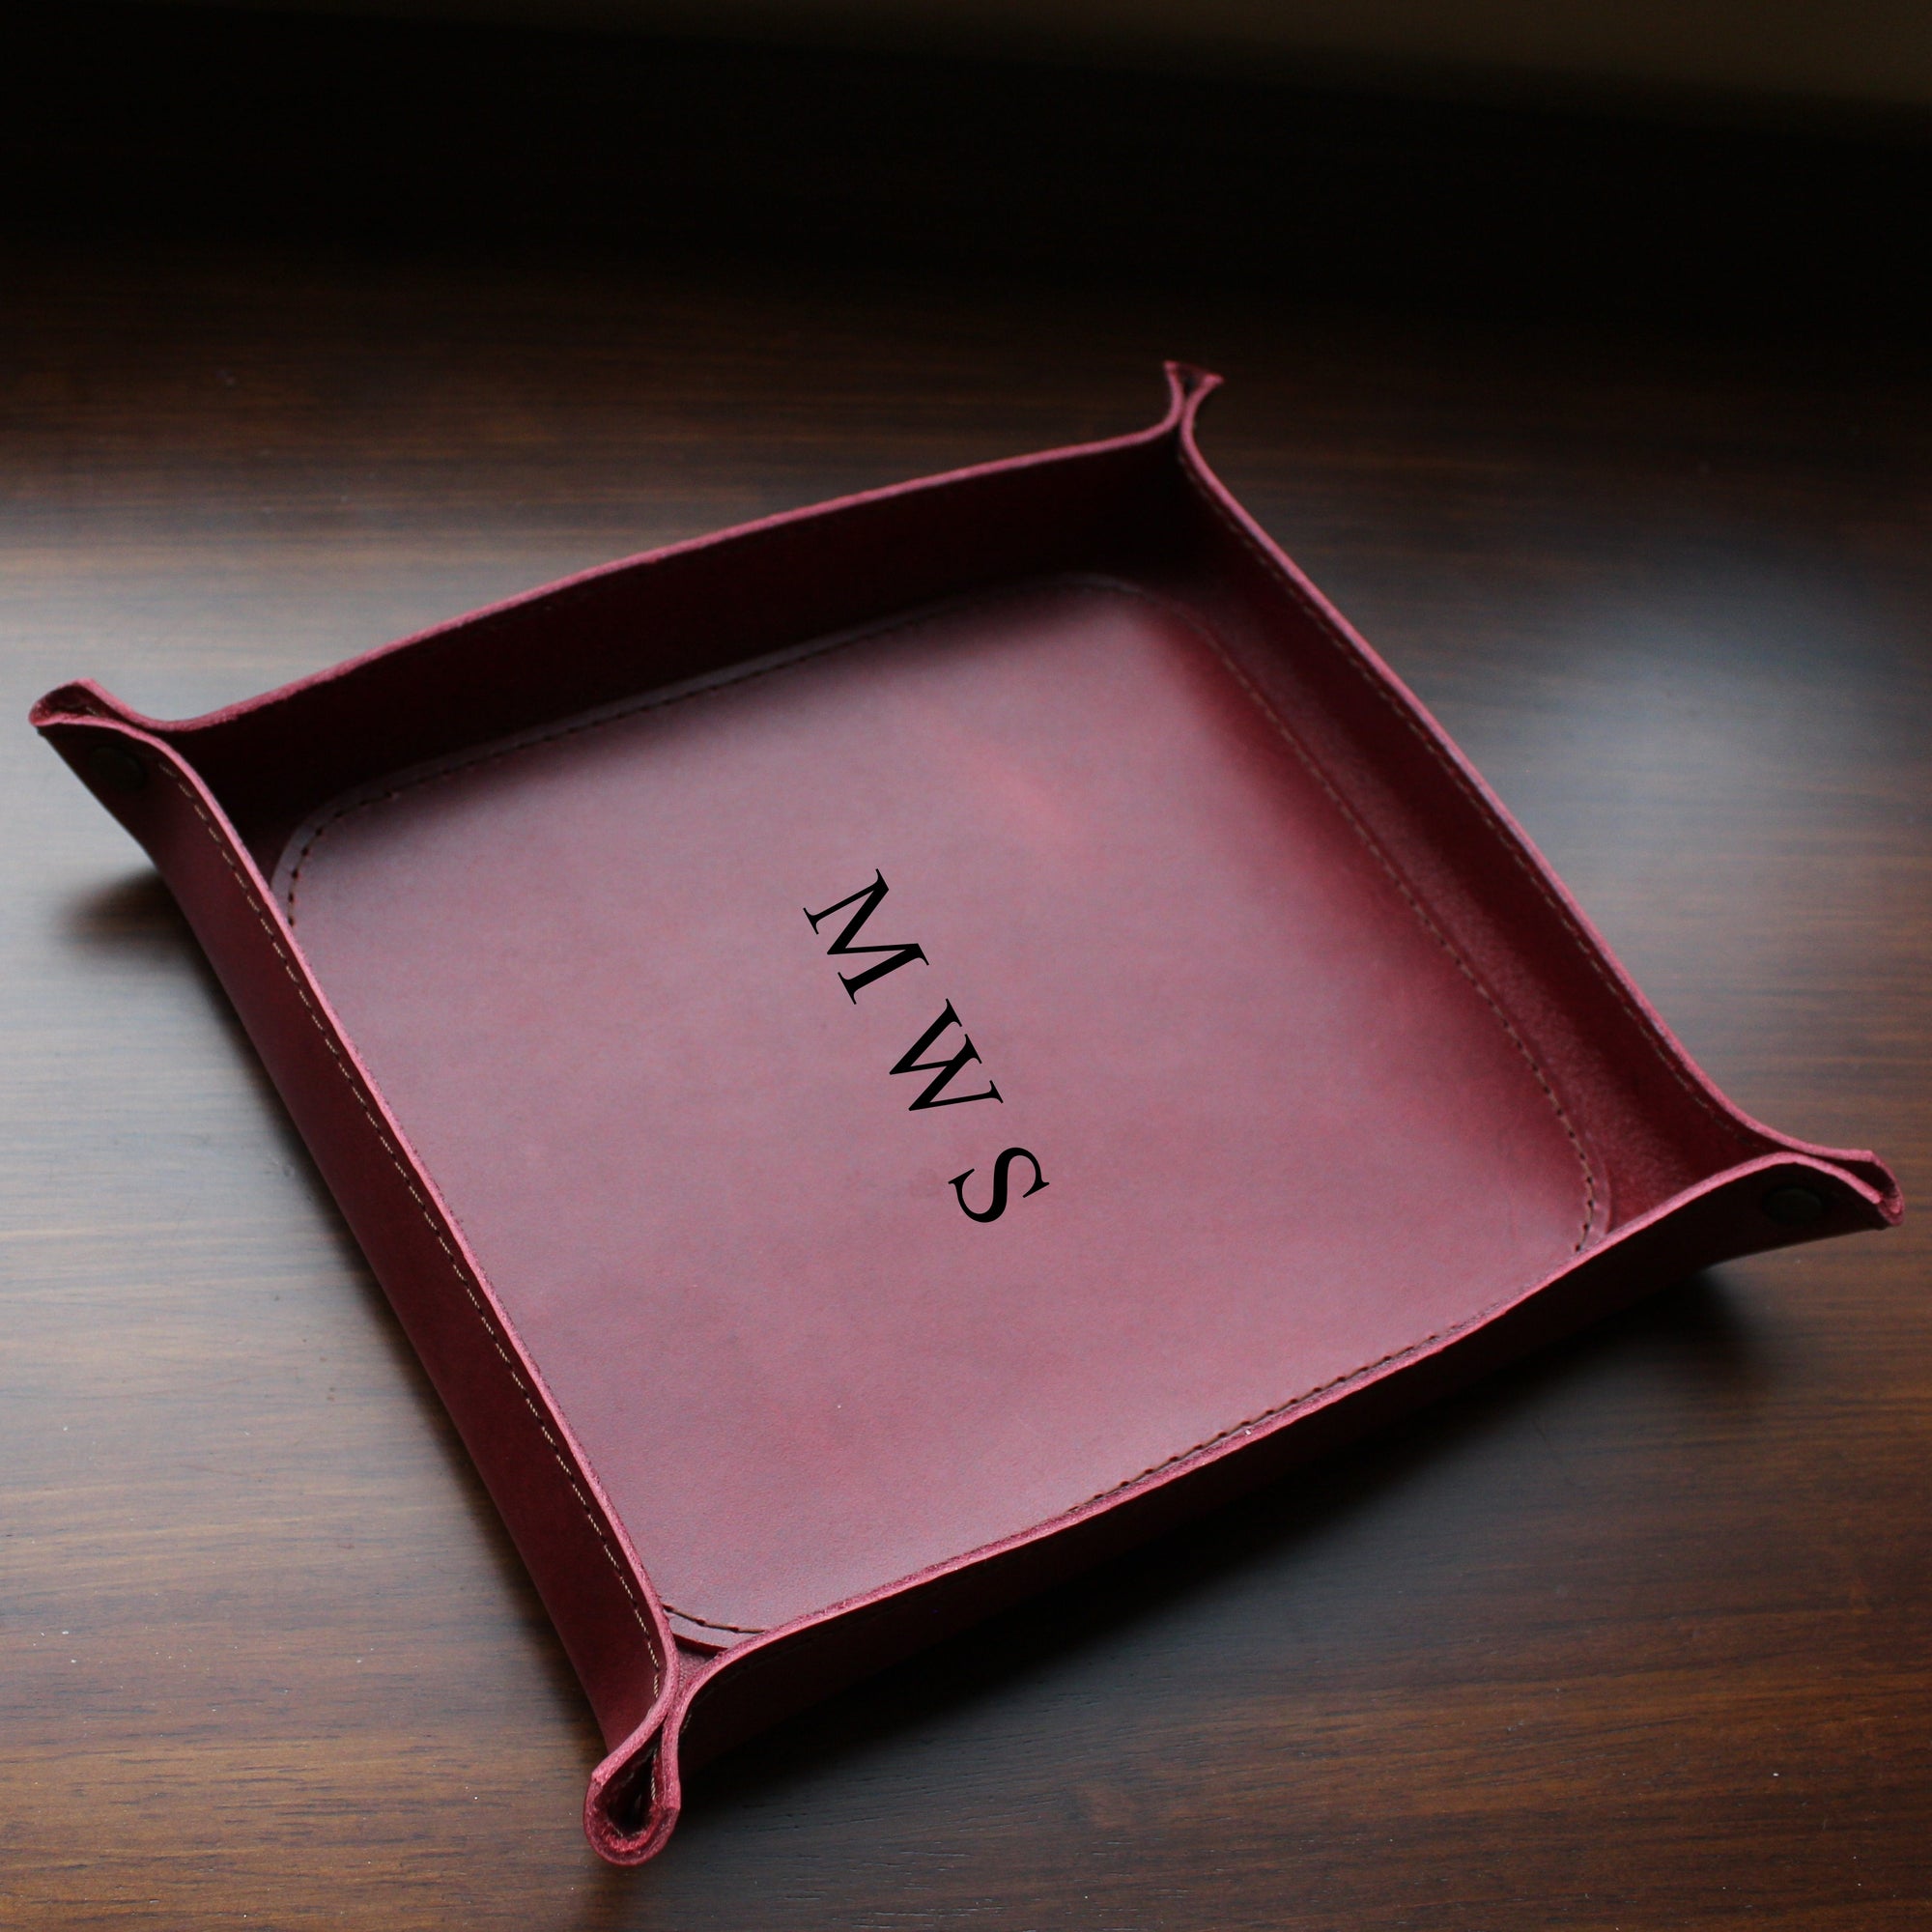 Valet tray of premium leather  for decorative and storage purposes